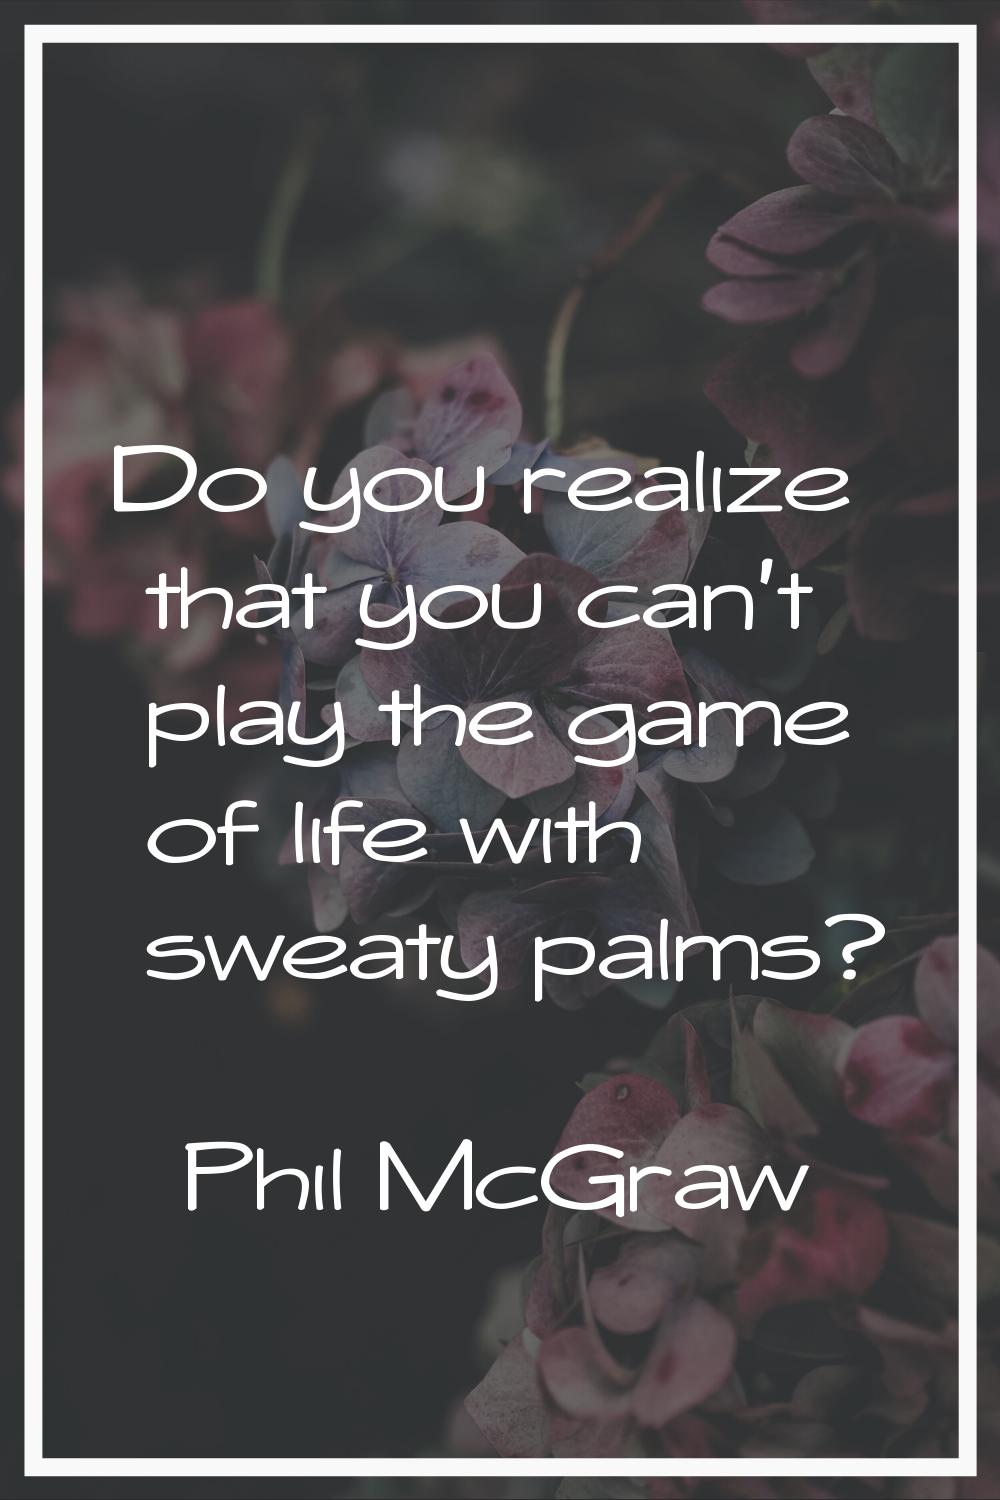 Do you realize that you can't play the game of life with sweaty palms?